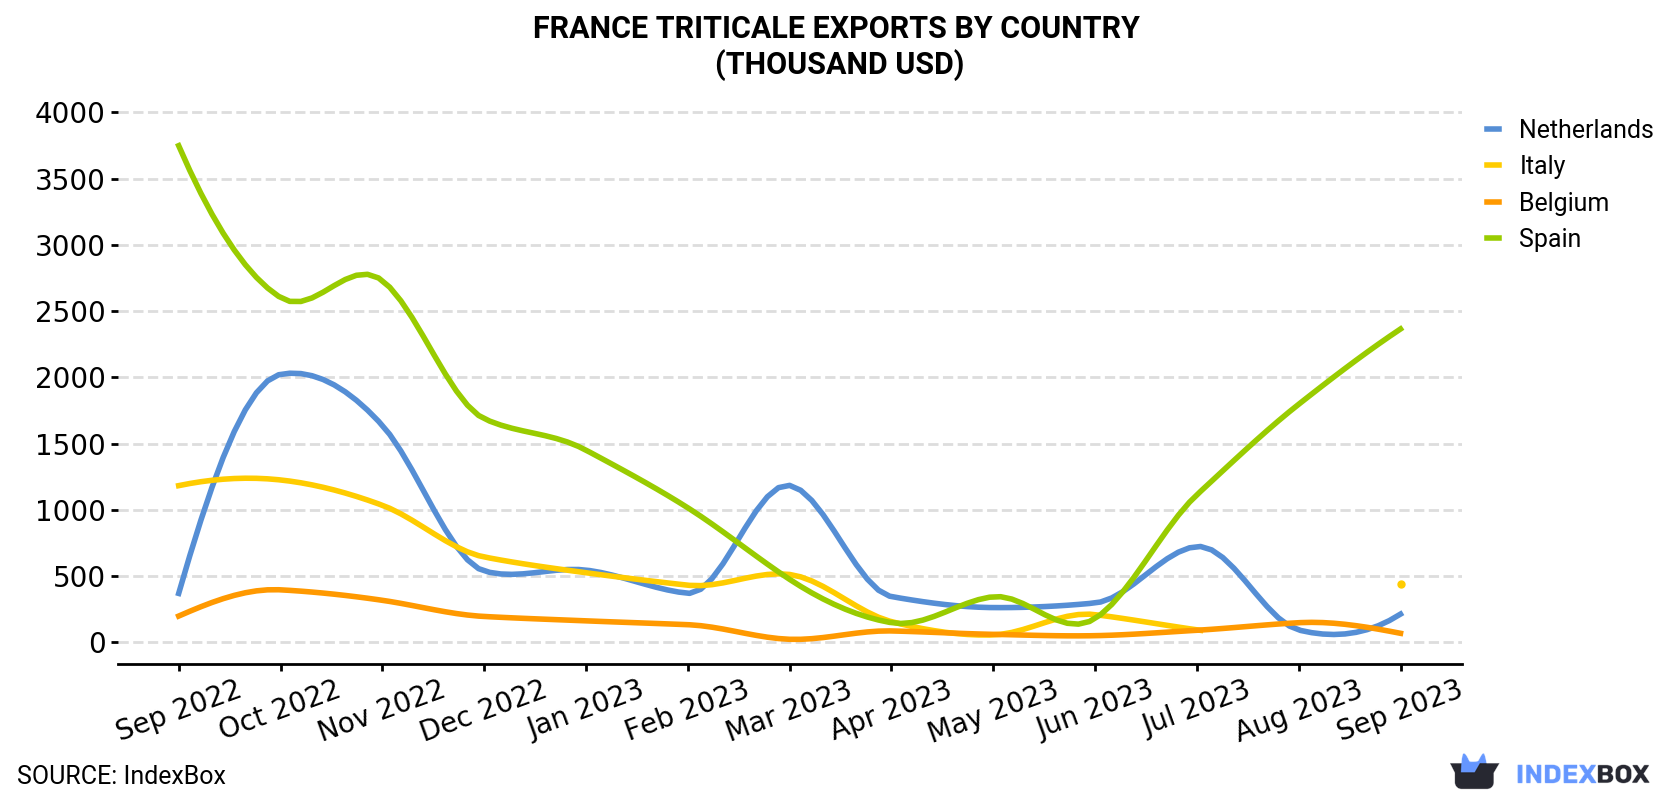 France Triticale Exports By Country (Thousand USD)